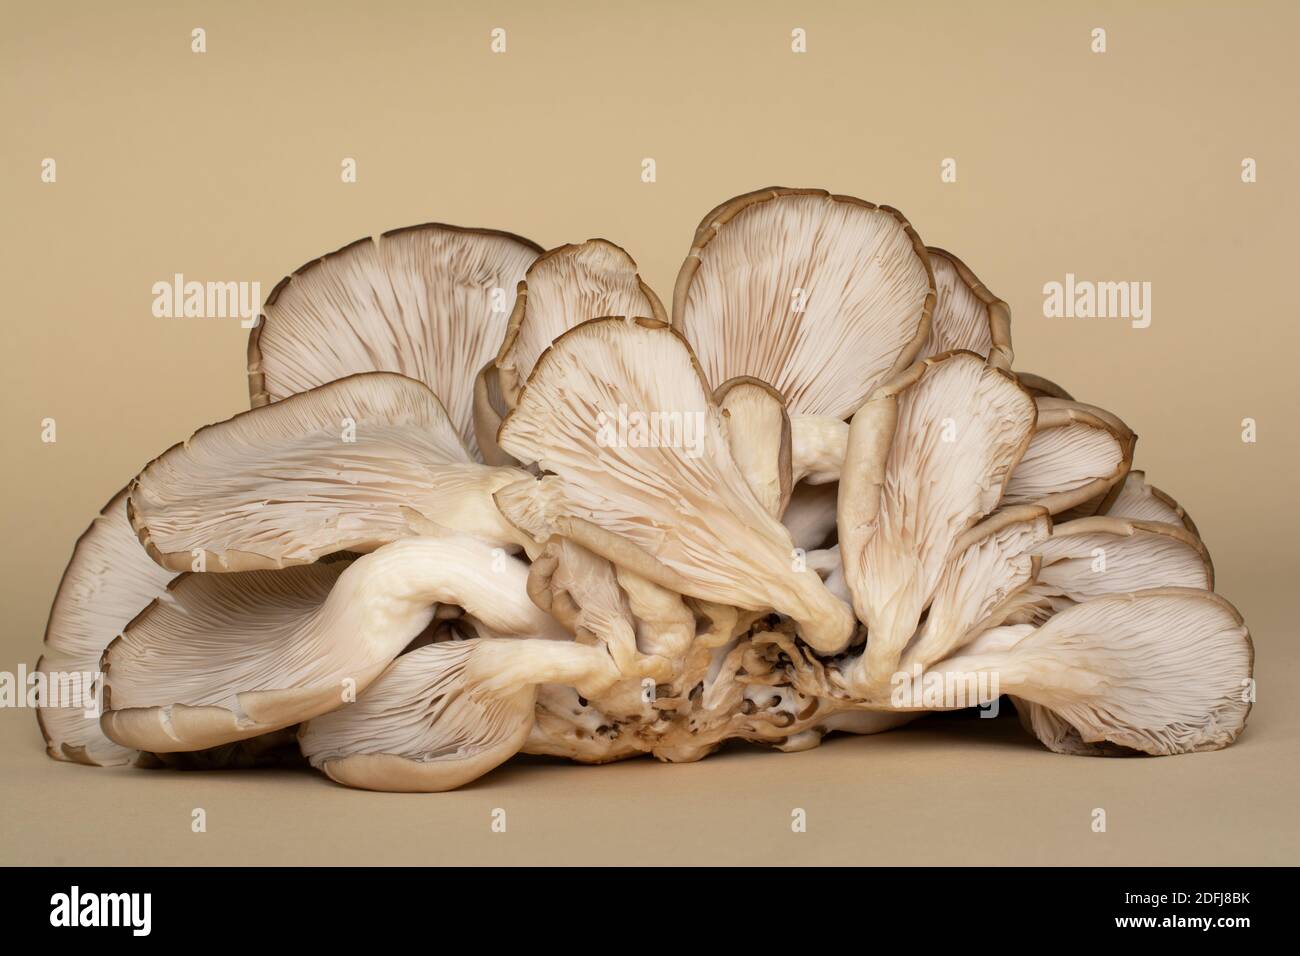 Oyster mushrooms are a type of edible fungi. Fruiting bodies of fungi with their fleshy gills (hymenium) are lying on a ocher background. Stock Photo